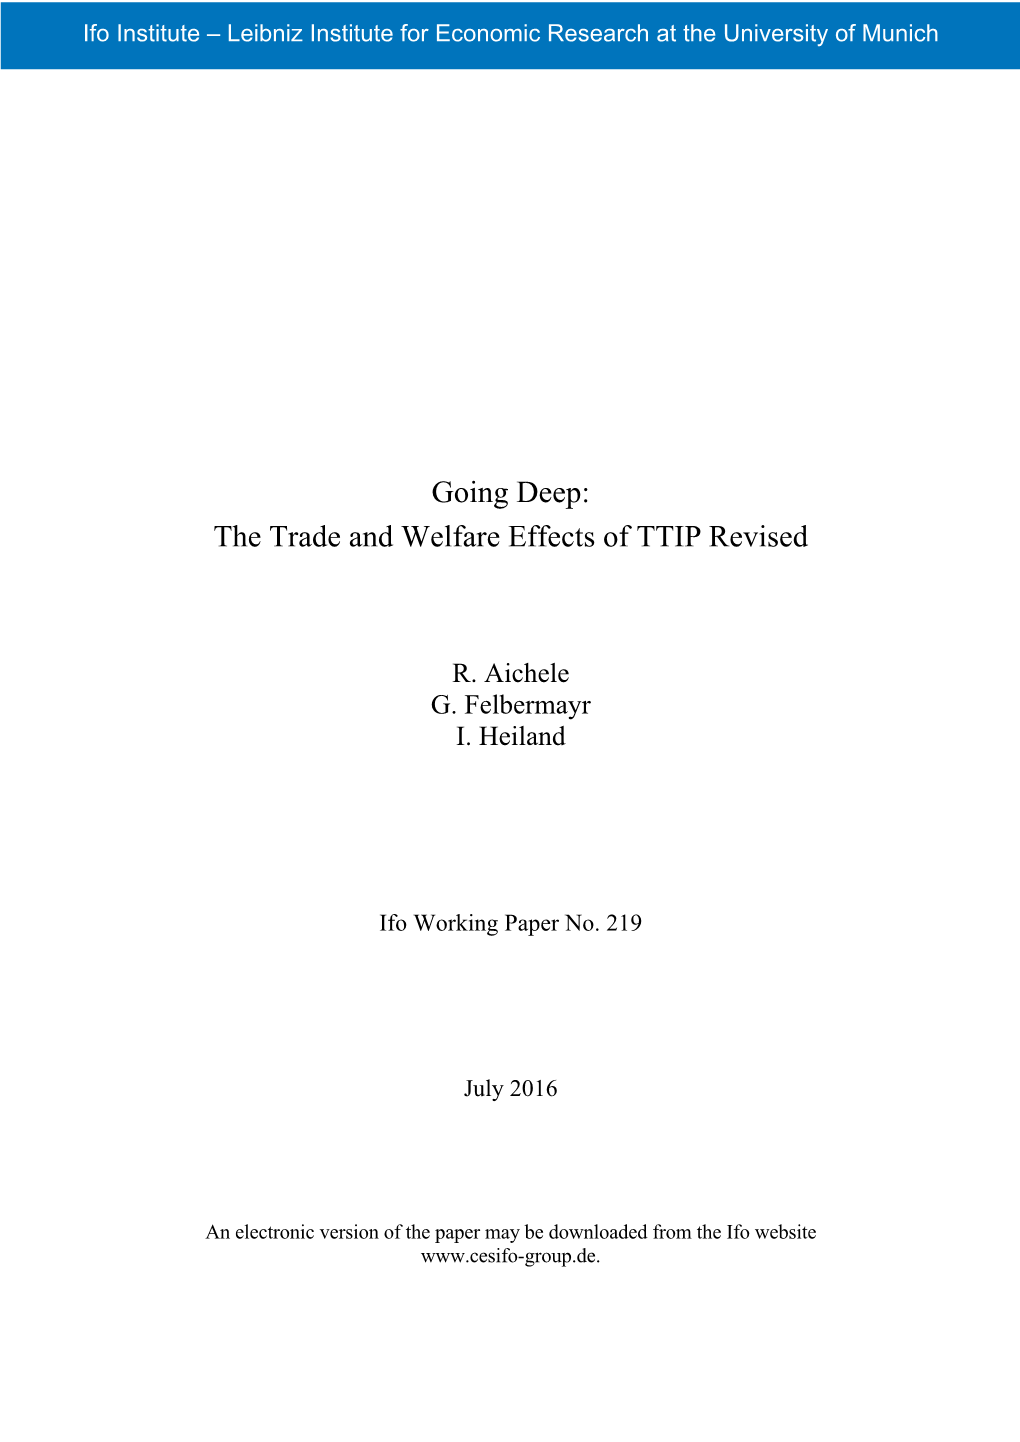 Going Deep: the Trade and Welfare Effects of TTIP Revised